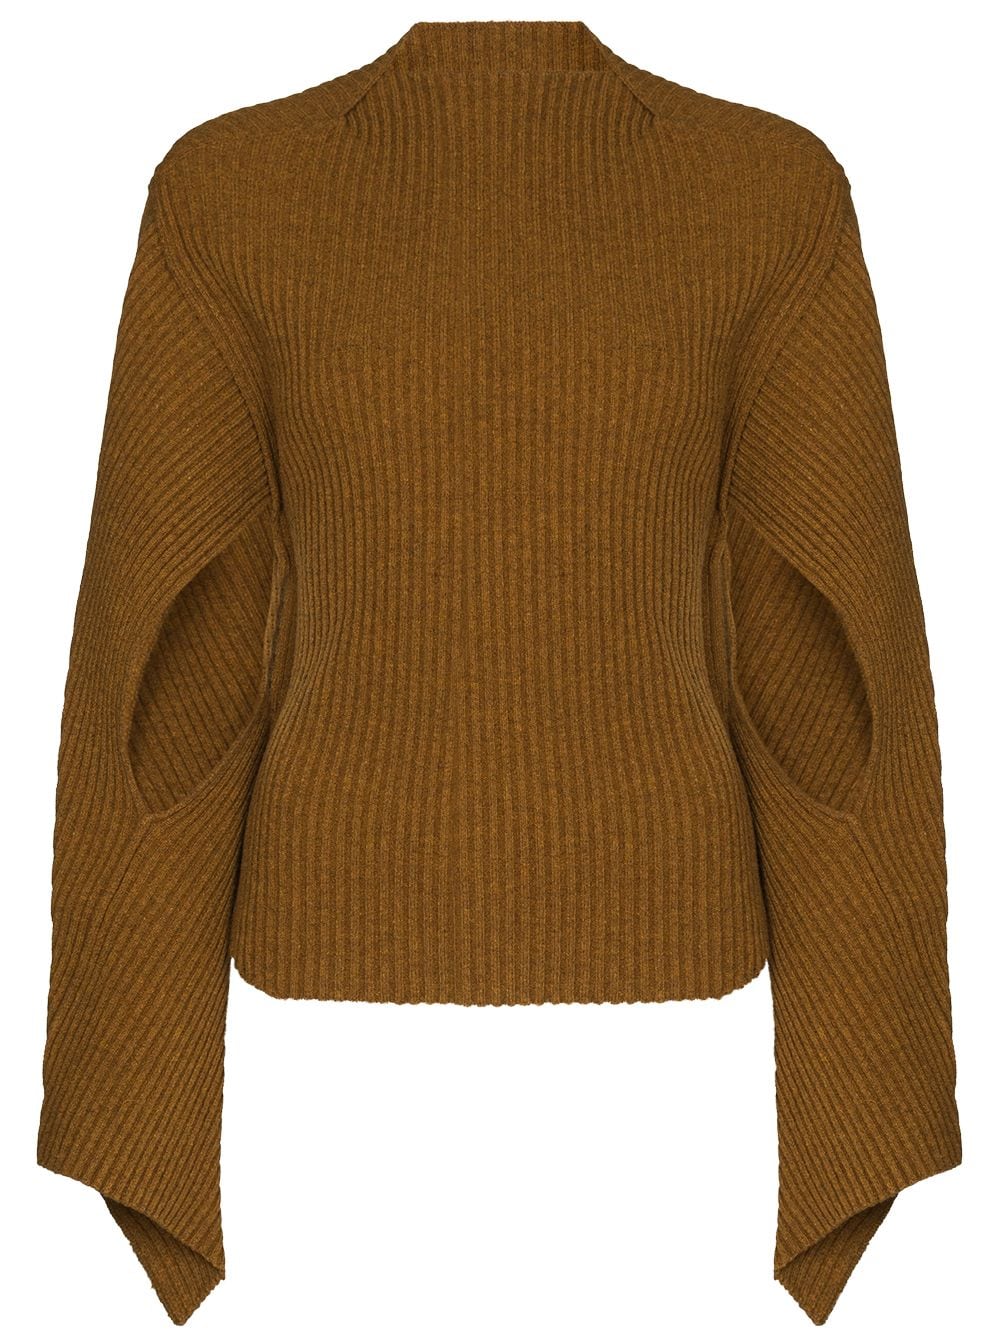 Victoria Beckham cut-out Sleeve Ribbed Jumper - Farfetch